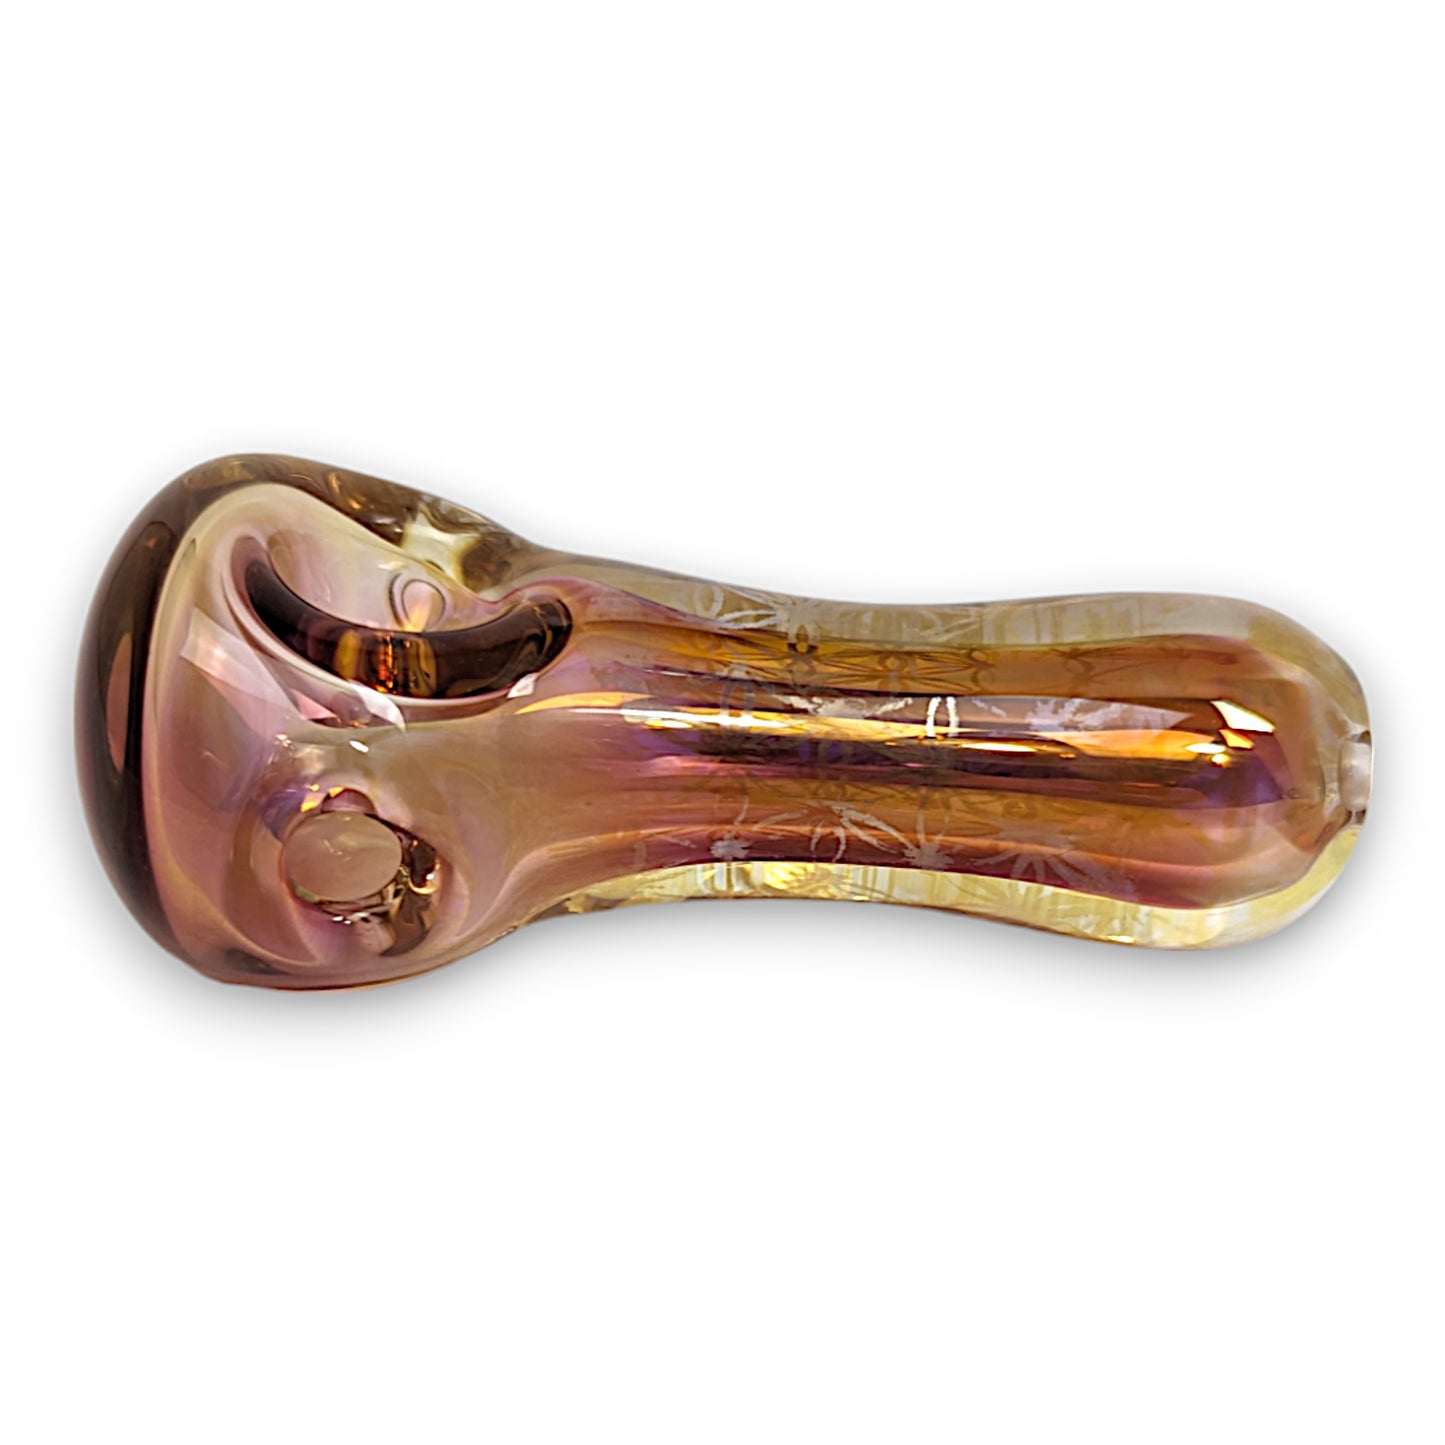 Fumed hand pipe